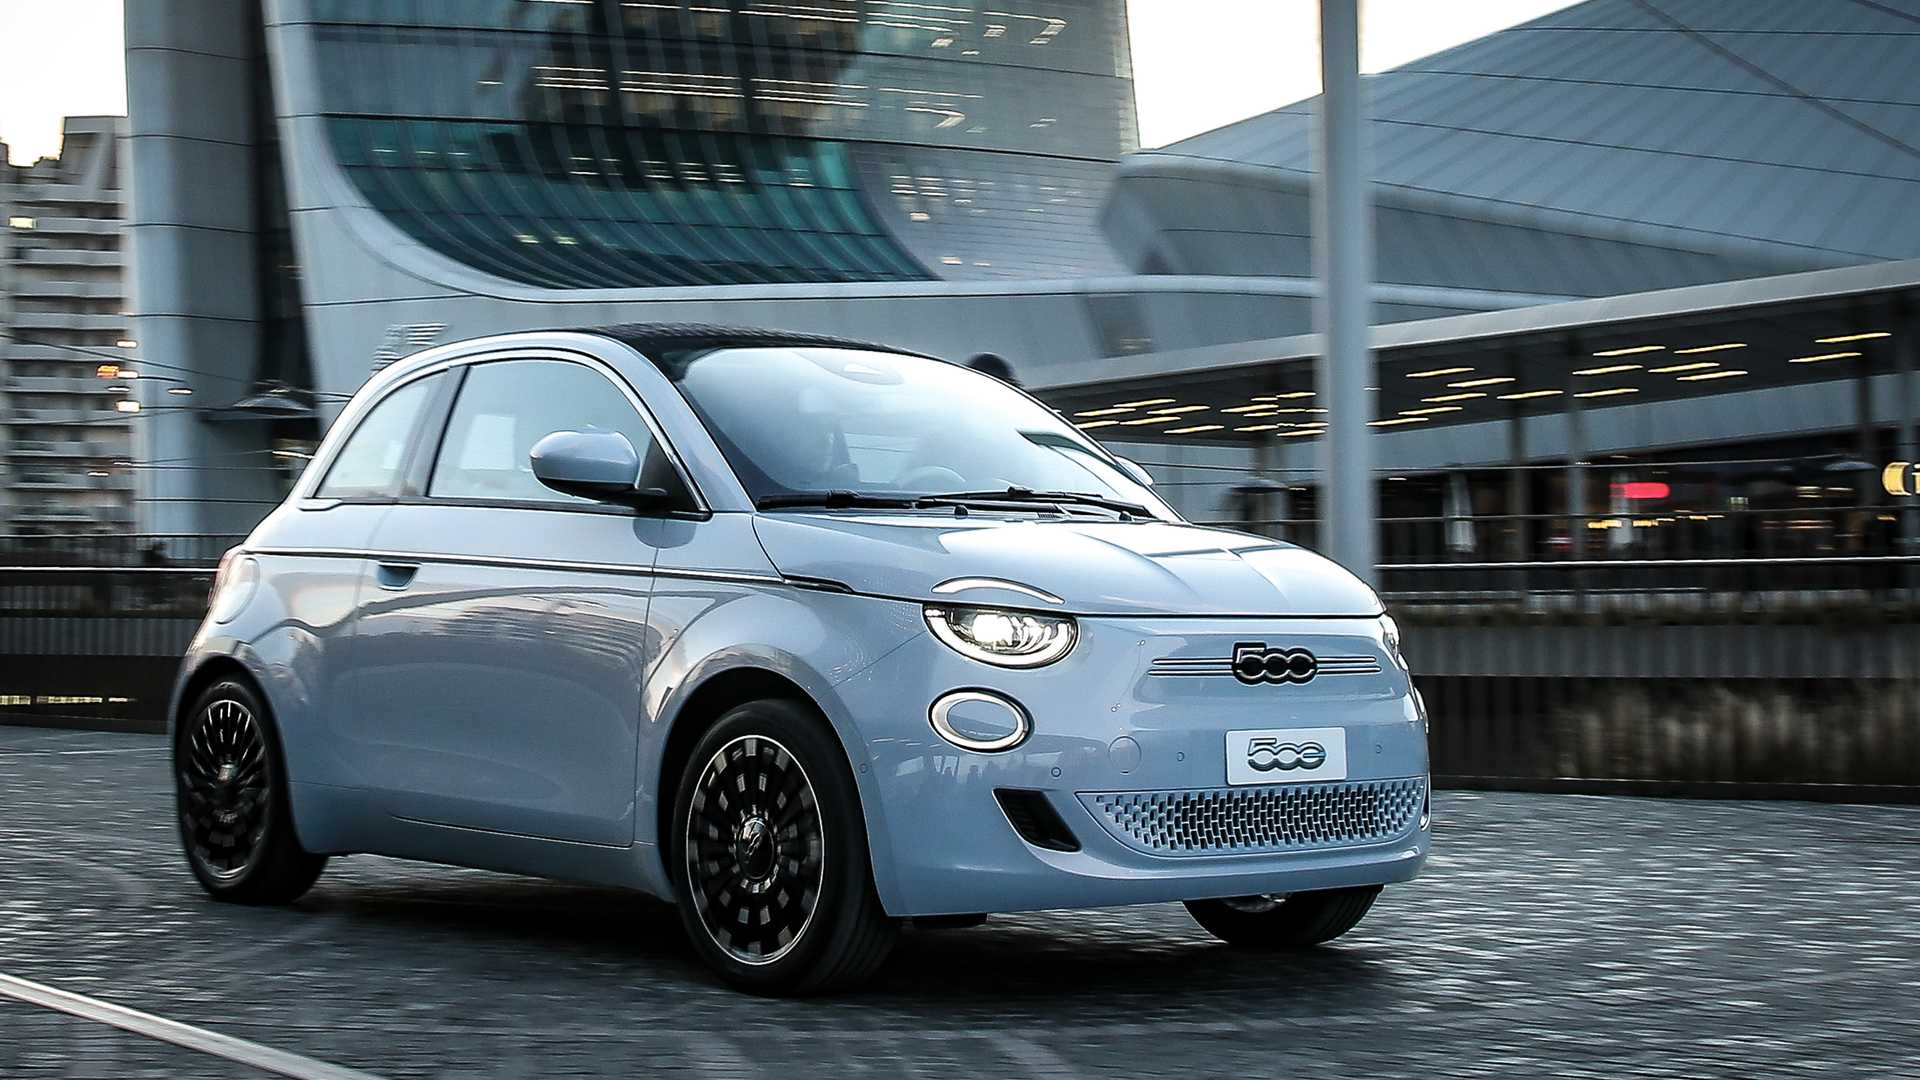 Fiat Goes all-electric in Europe